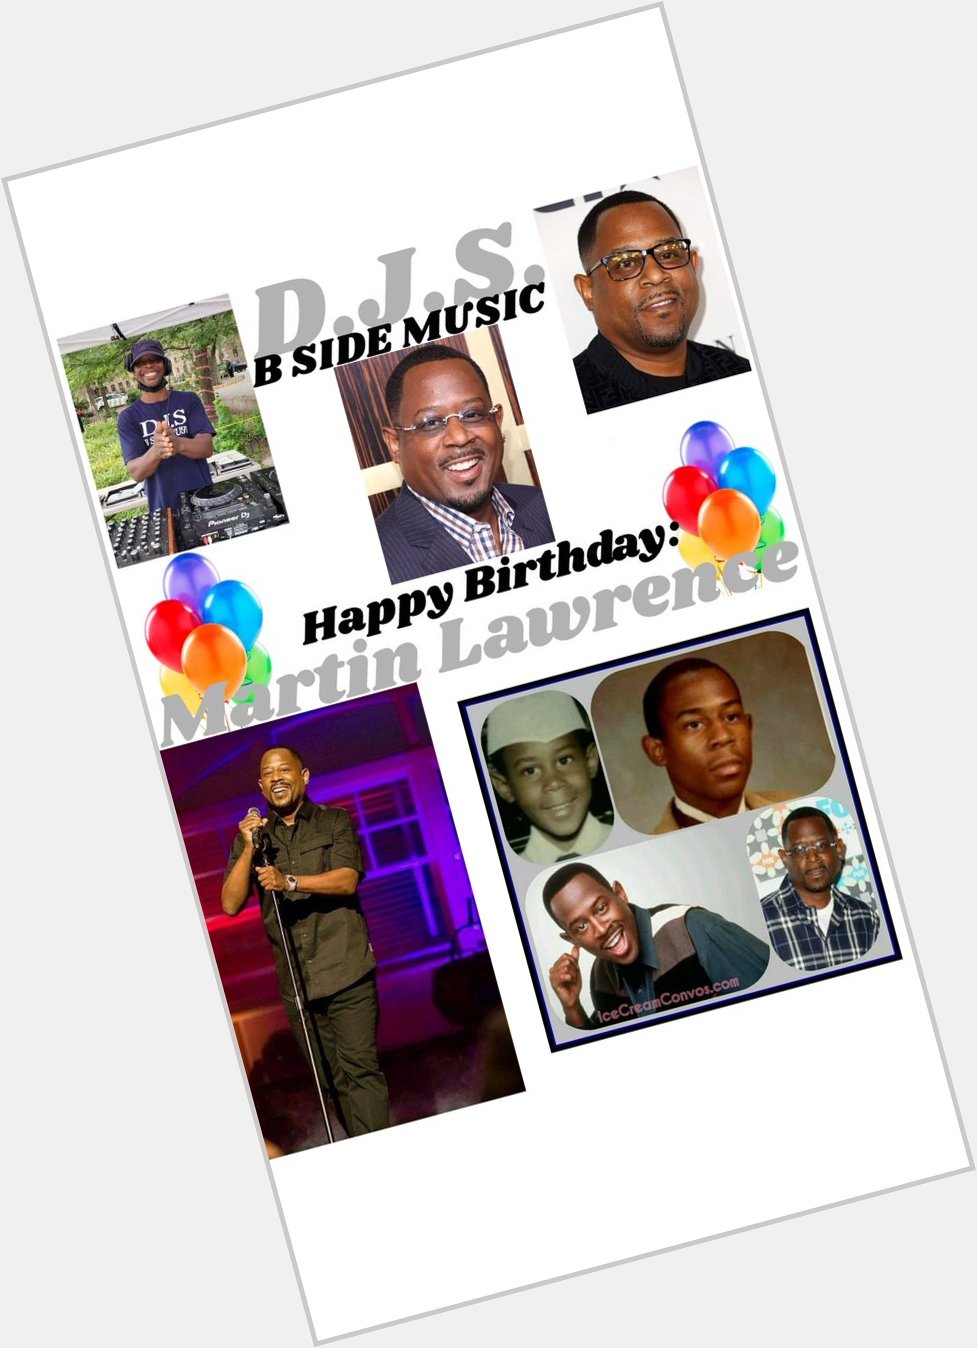 I(D.J.S.)\"B SIDE MUSIC\" saying Happy Birthday to Comedian/Actor: \"MARTIN LAWRENCE\"!!! 